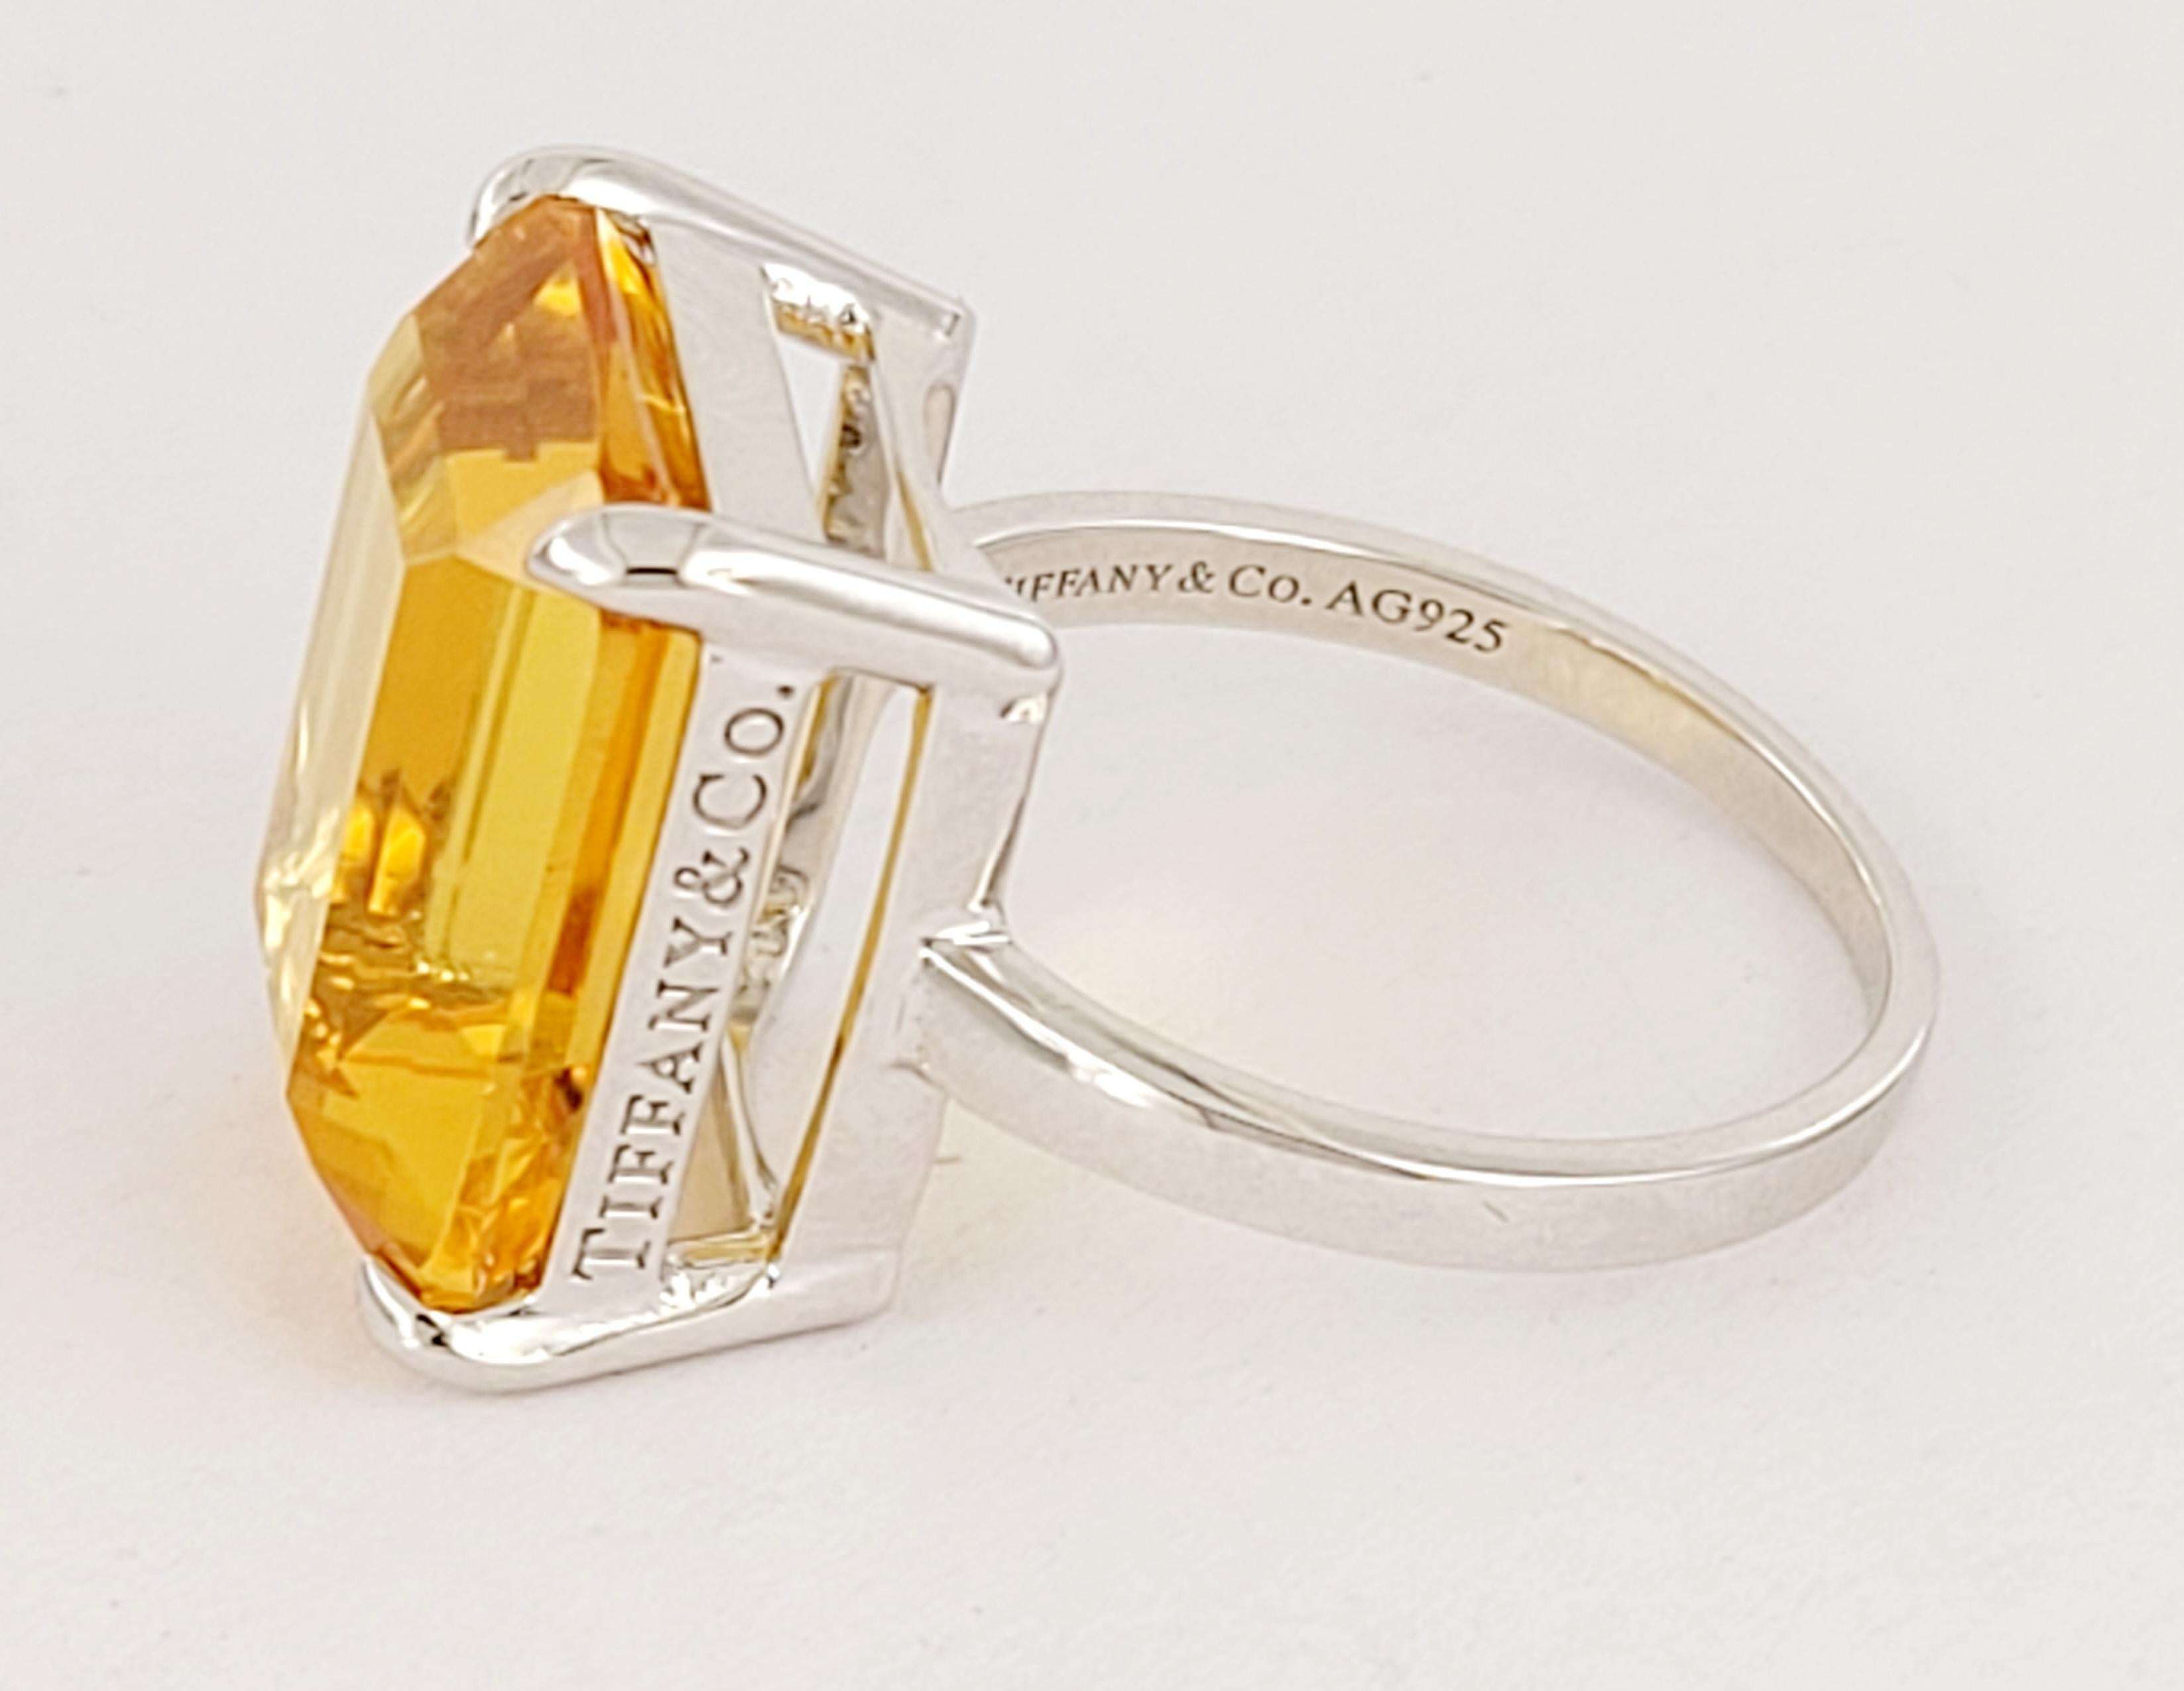 Emerald Cut Tiffany & Co. Sterling Silver  Sparklers  Citrine Ring Size 7 For Sale